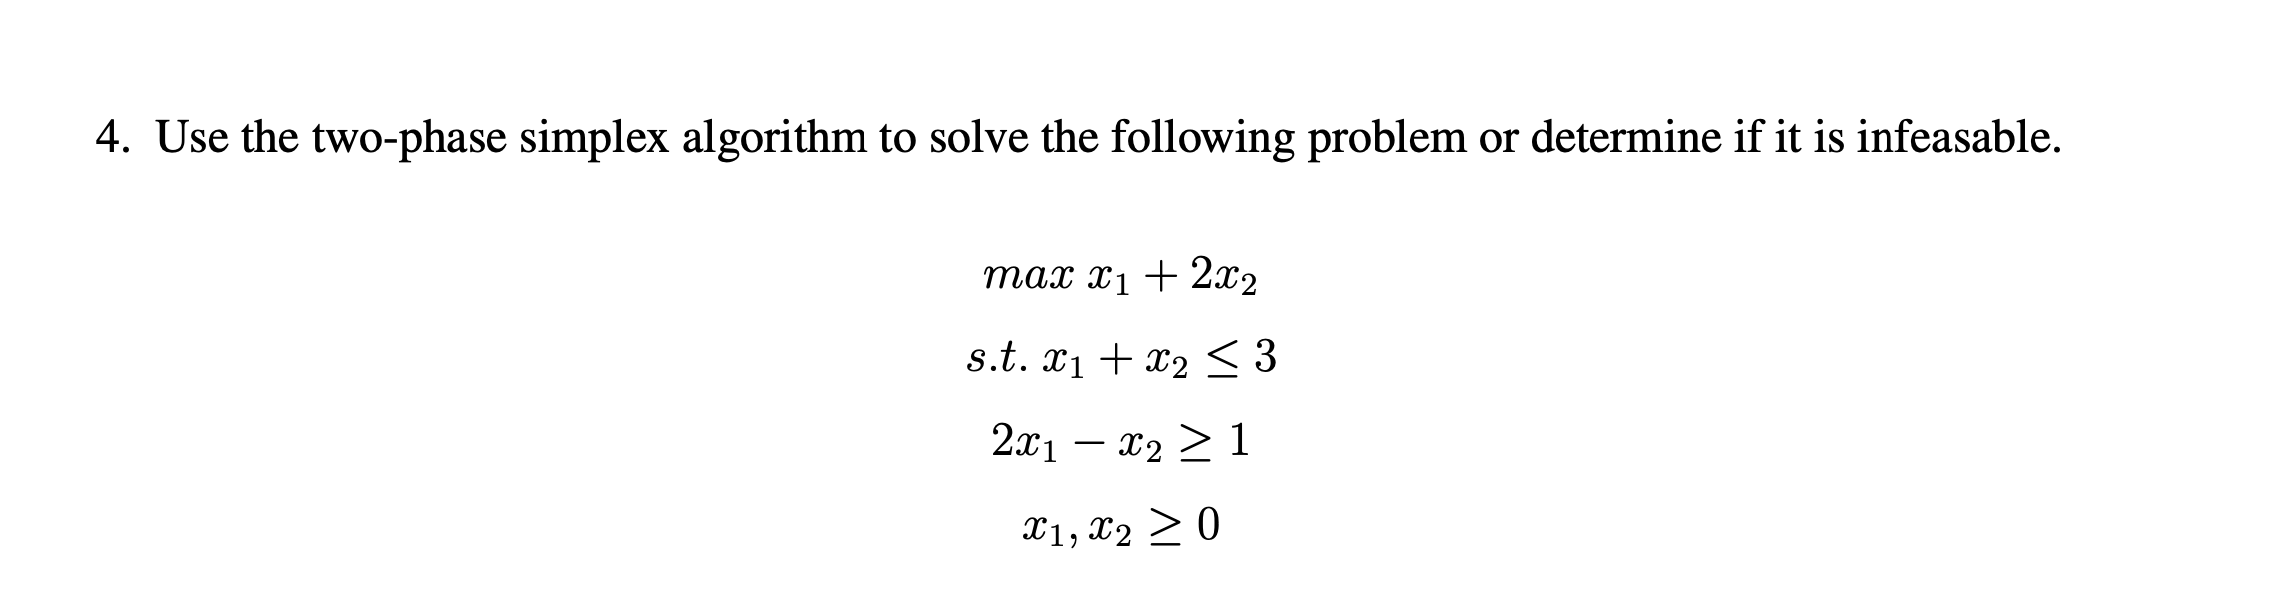 Use the two-phase simplex algorithm to solve the following problem or determine if it is infeasable.
max xị + 2x2
s.t. x1 + x2 < 3
2.x1 – x2 > 1
X1, x2 > 0
